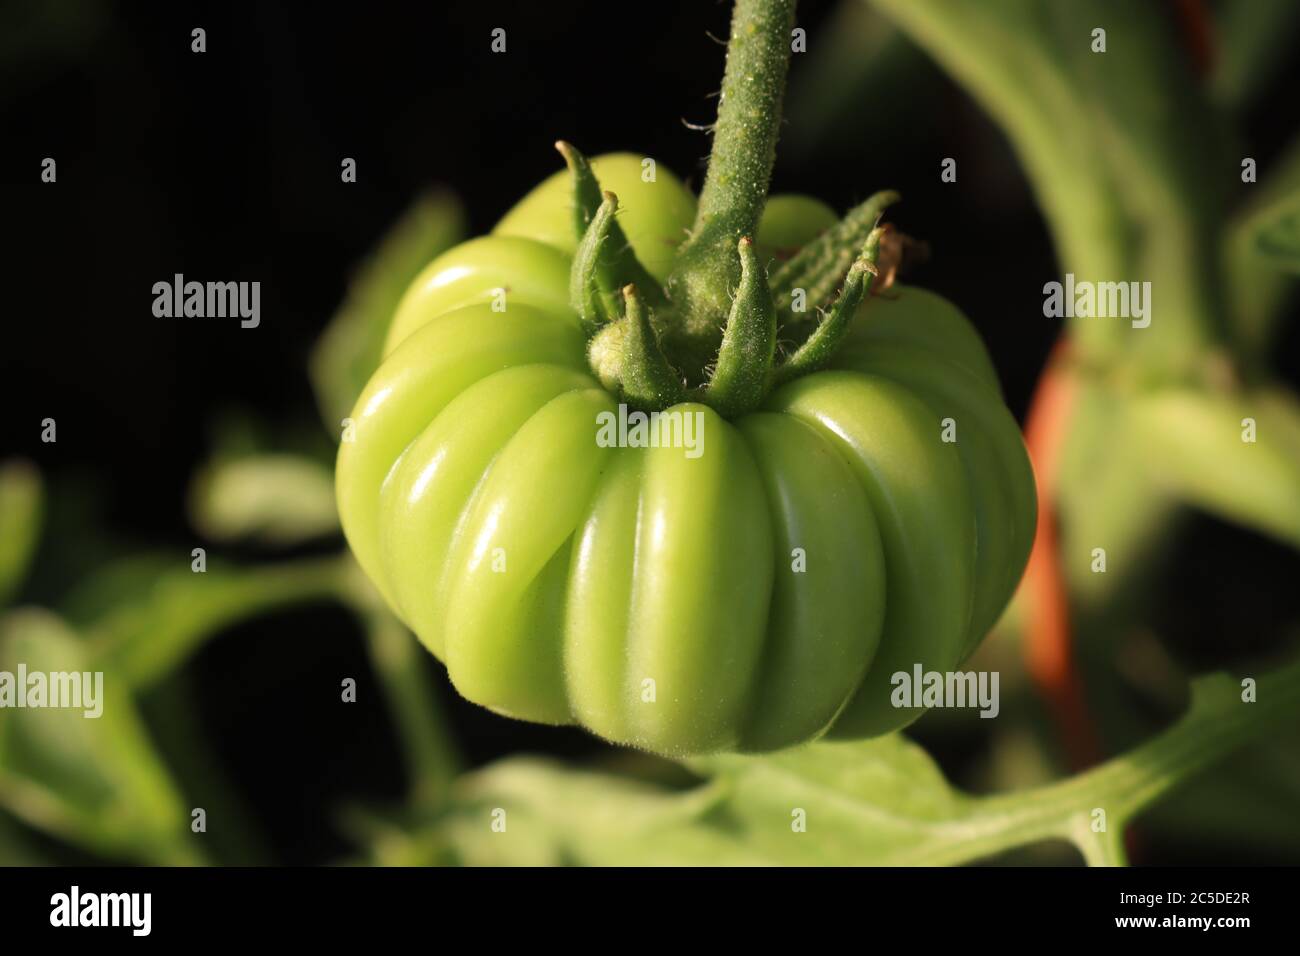 Green beefsteak tomatoes on their plants close up Marmande tomatoes. Perfect formation 2 Stock Photo